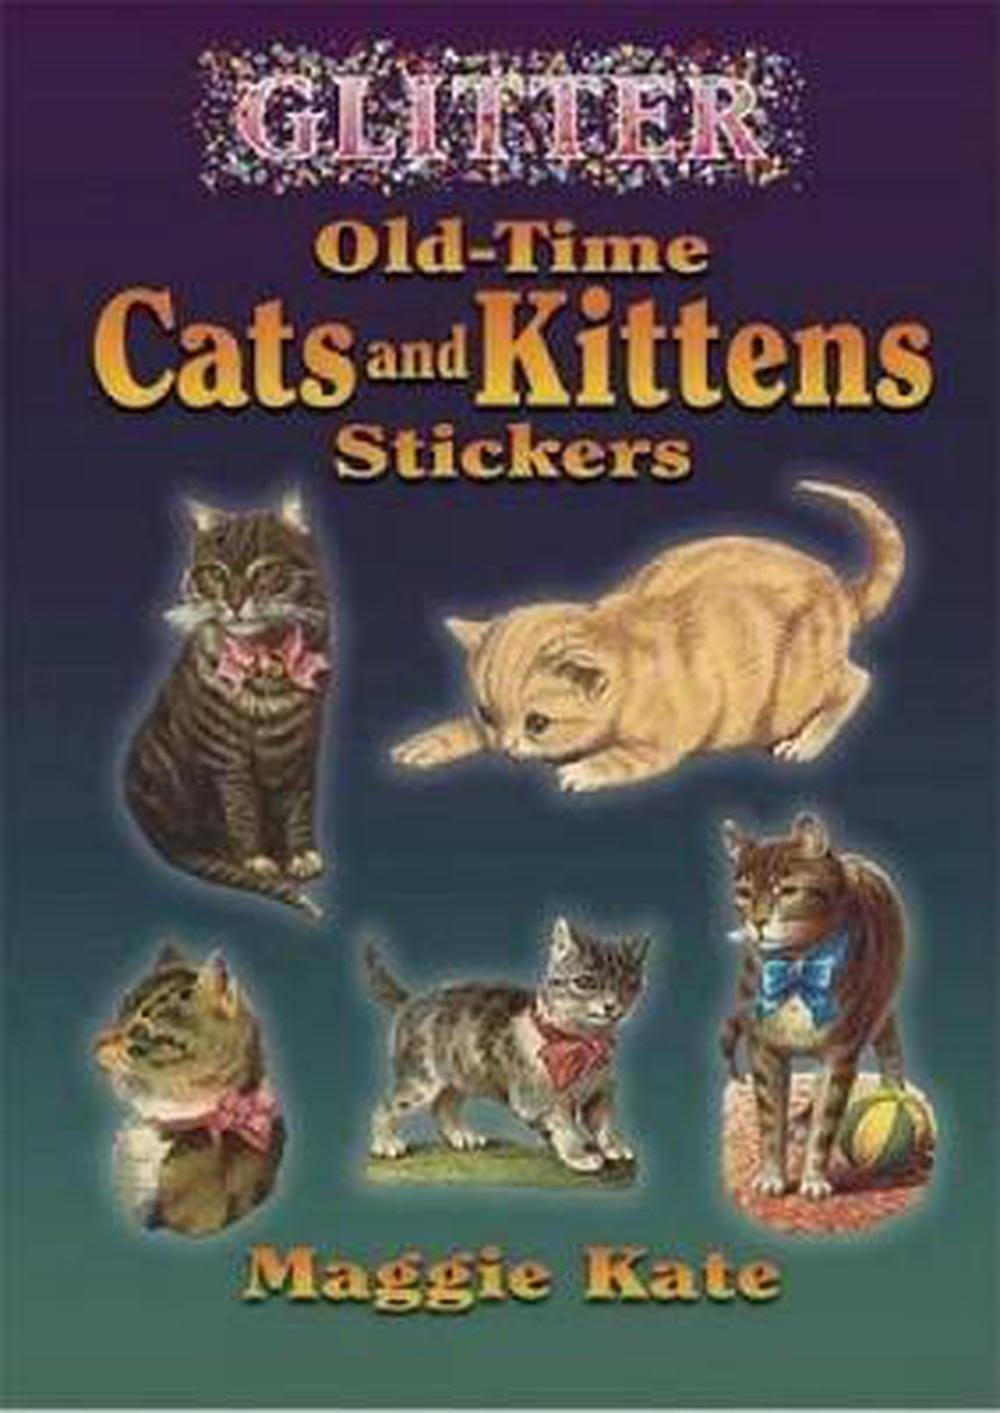 Glitter Old-Time Cats and Kittens Stickers [Book]